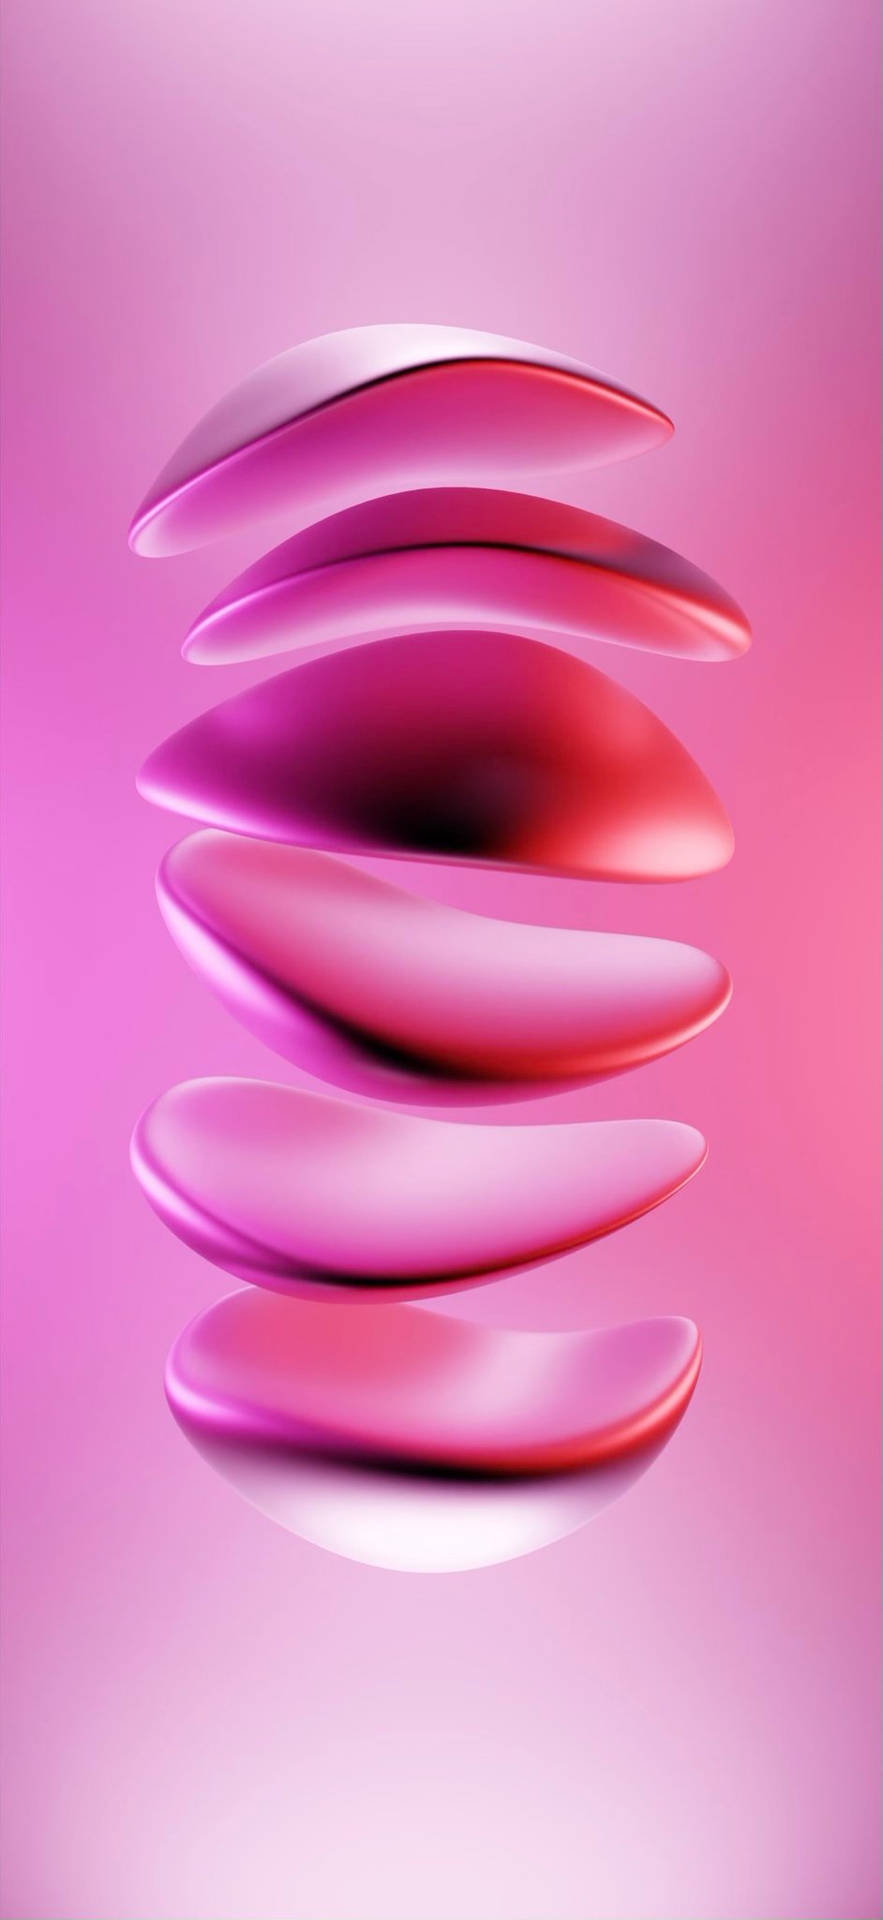 Pink 3D iPhone Curved Pads Wallpaper